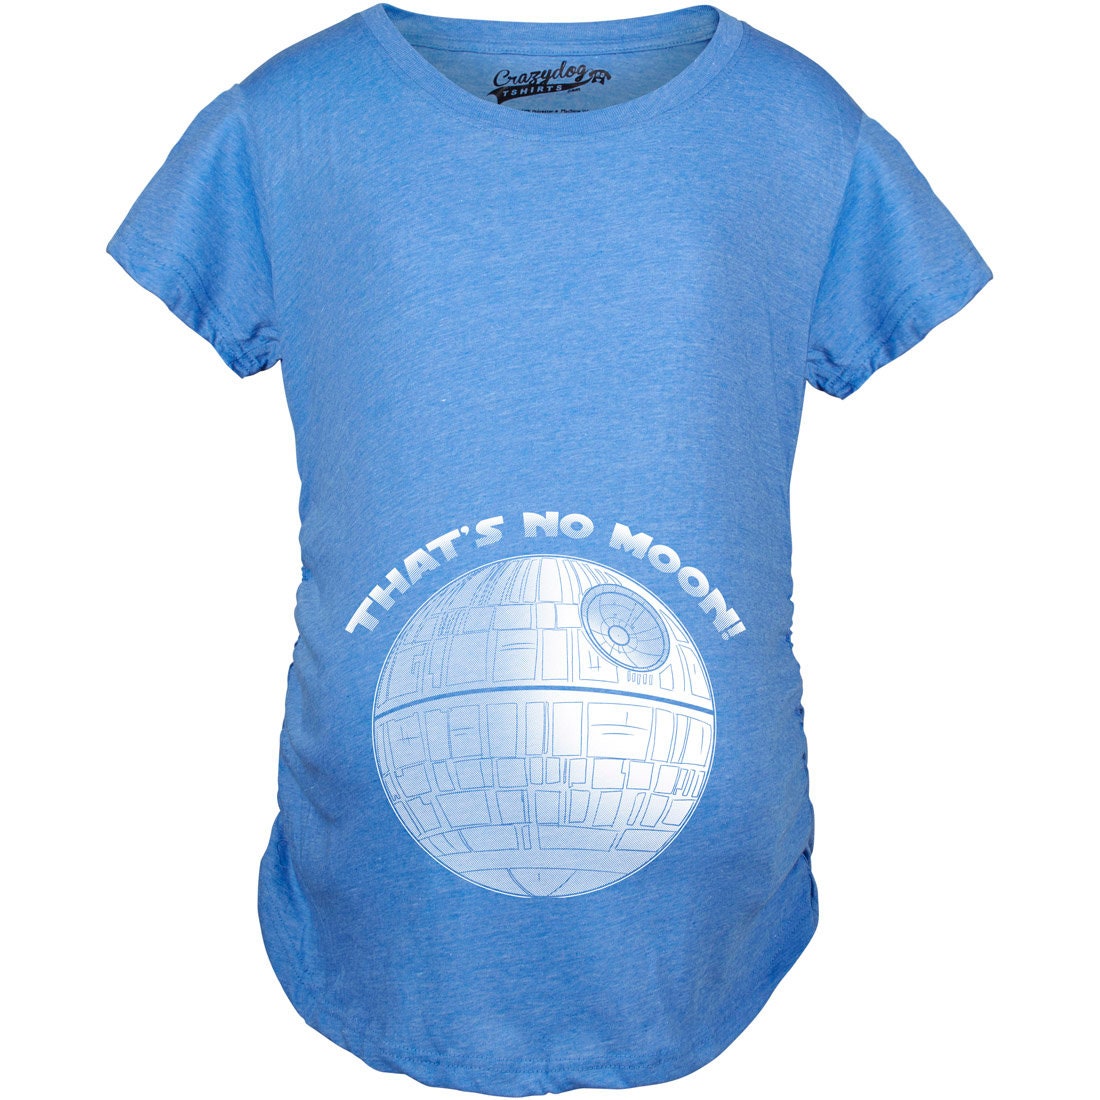 Maternity Thats No Moon Cute T Shirt Funny Pregnancy Announcement Baby Bump Tee 